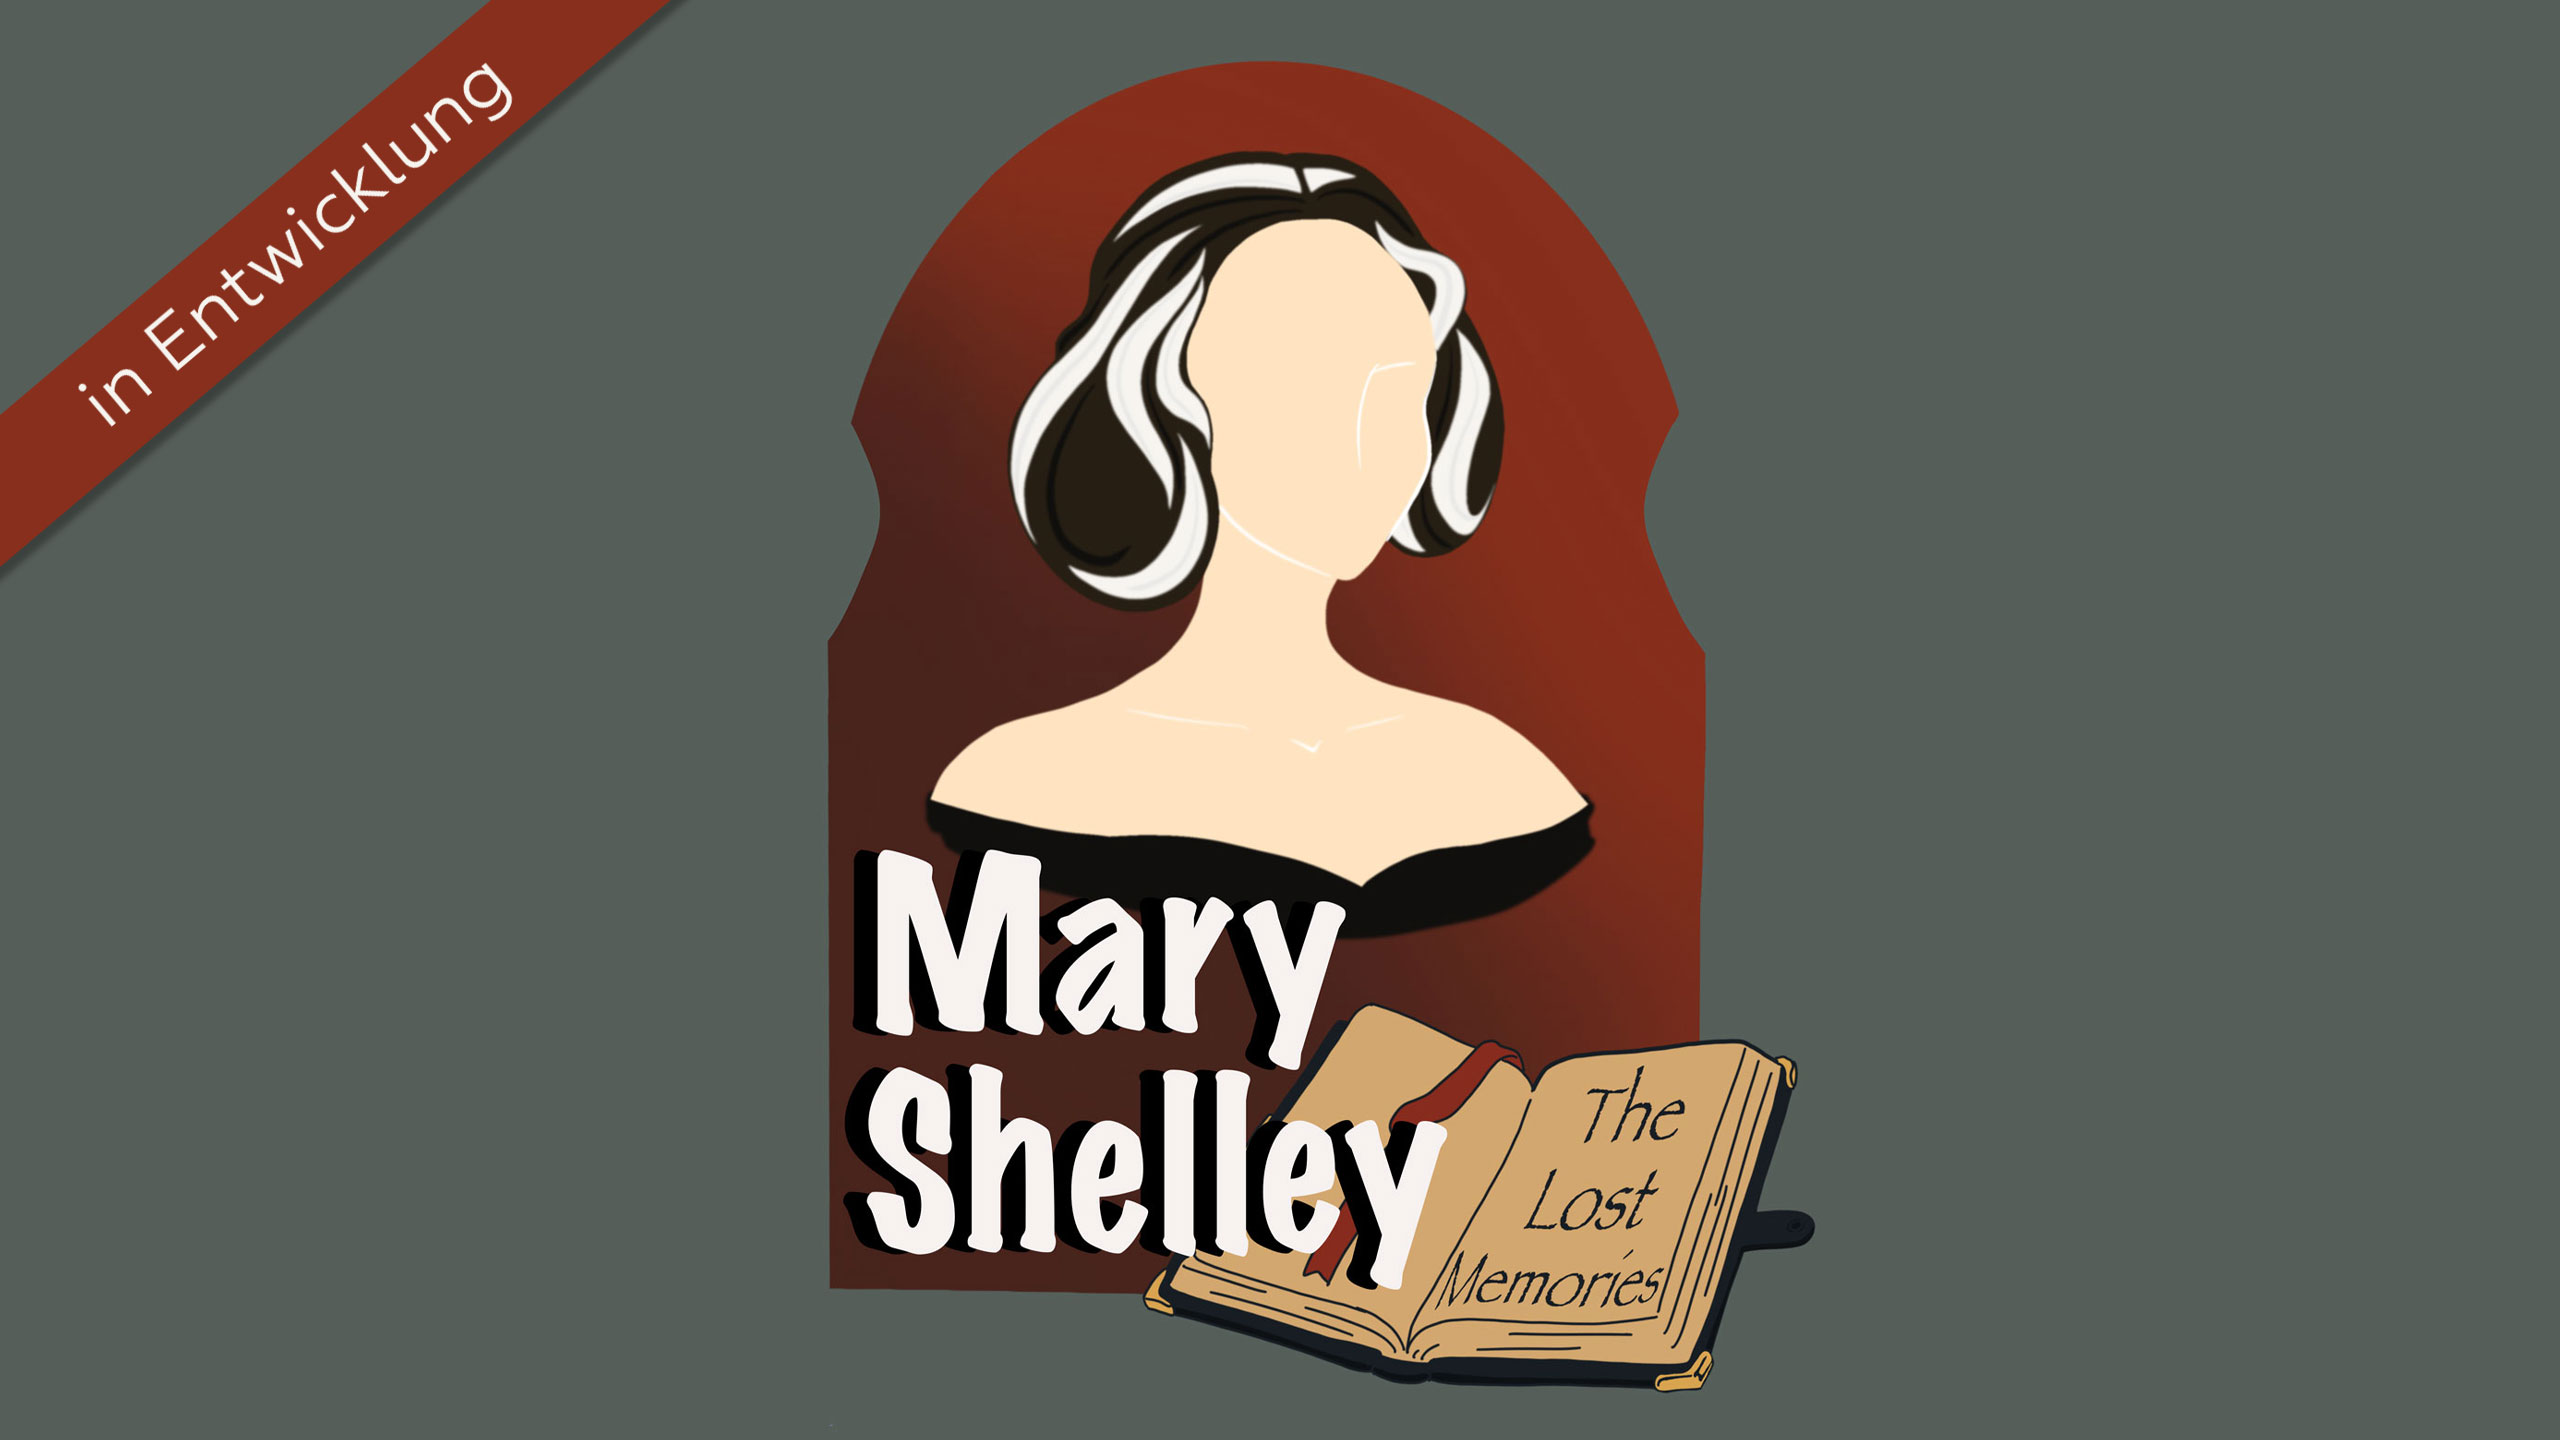 Mary Shelley -The Lost Memories